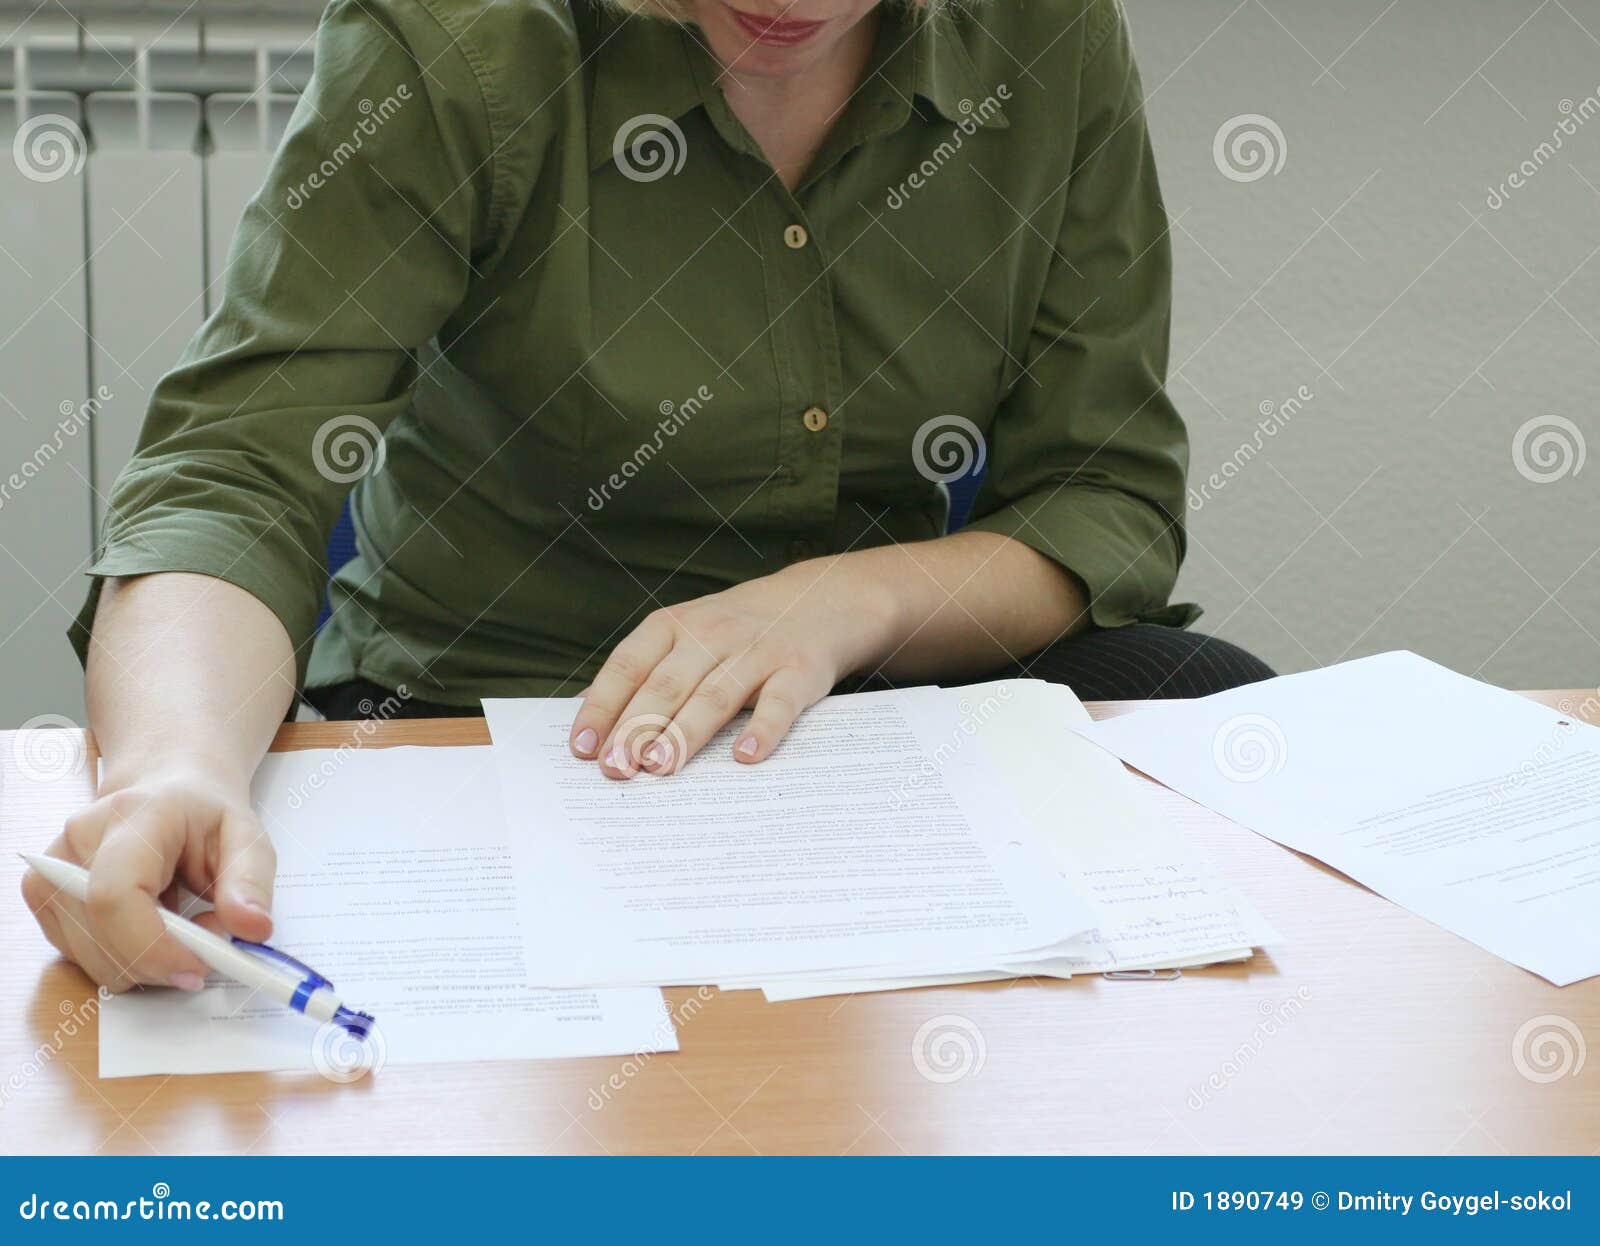 woman intently reading the documents (front)